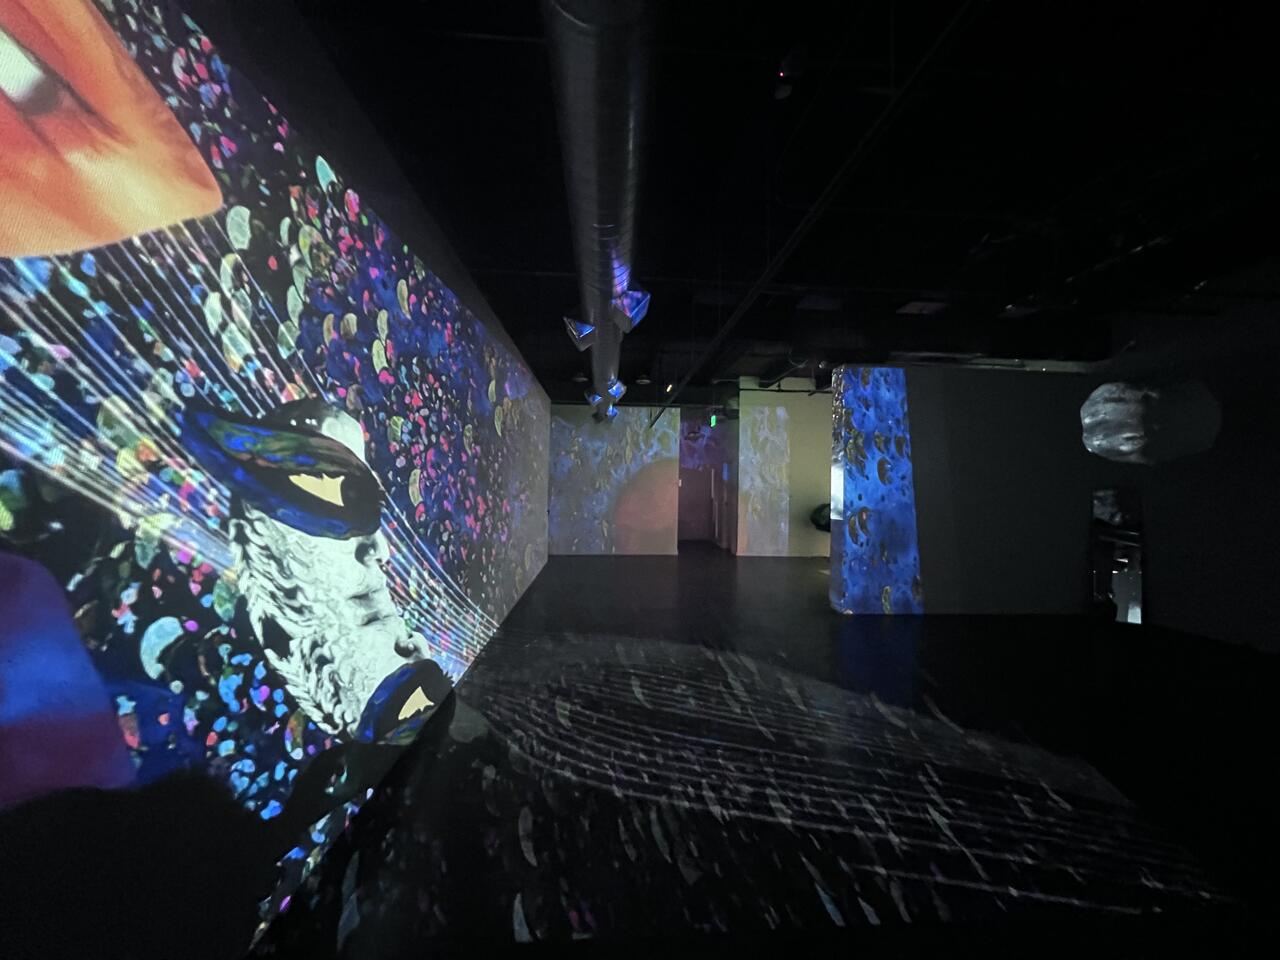 An image of a dark gallery-type hallway with video and lights displayed in an artistic manner